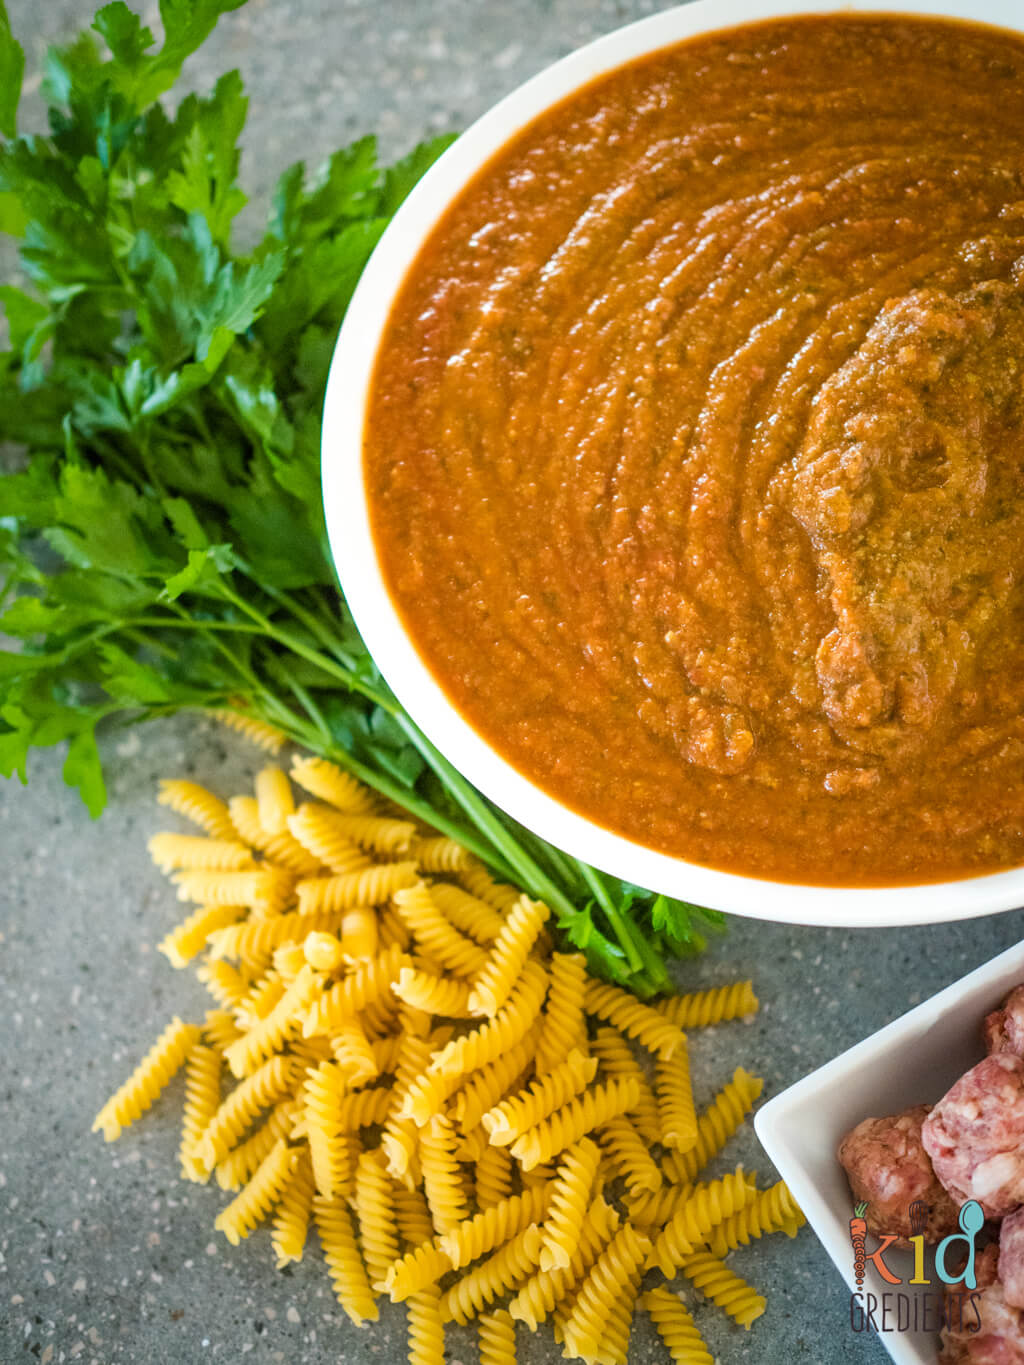 A bowl of food, with Sauce and Pasta